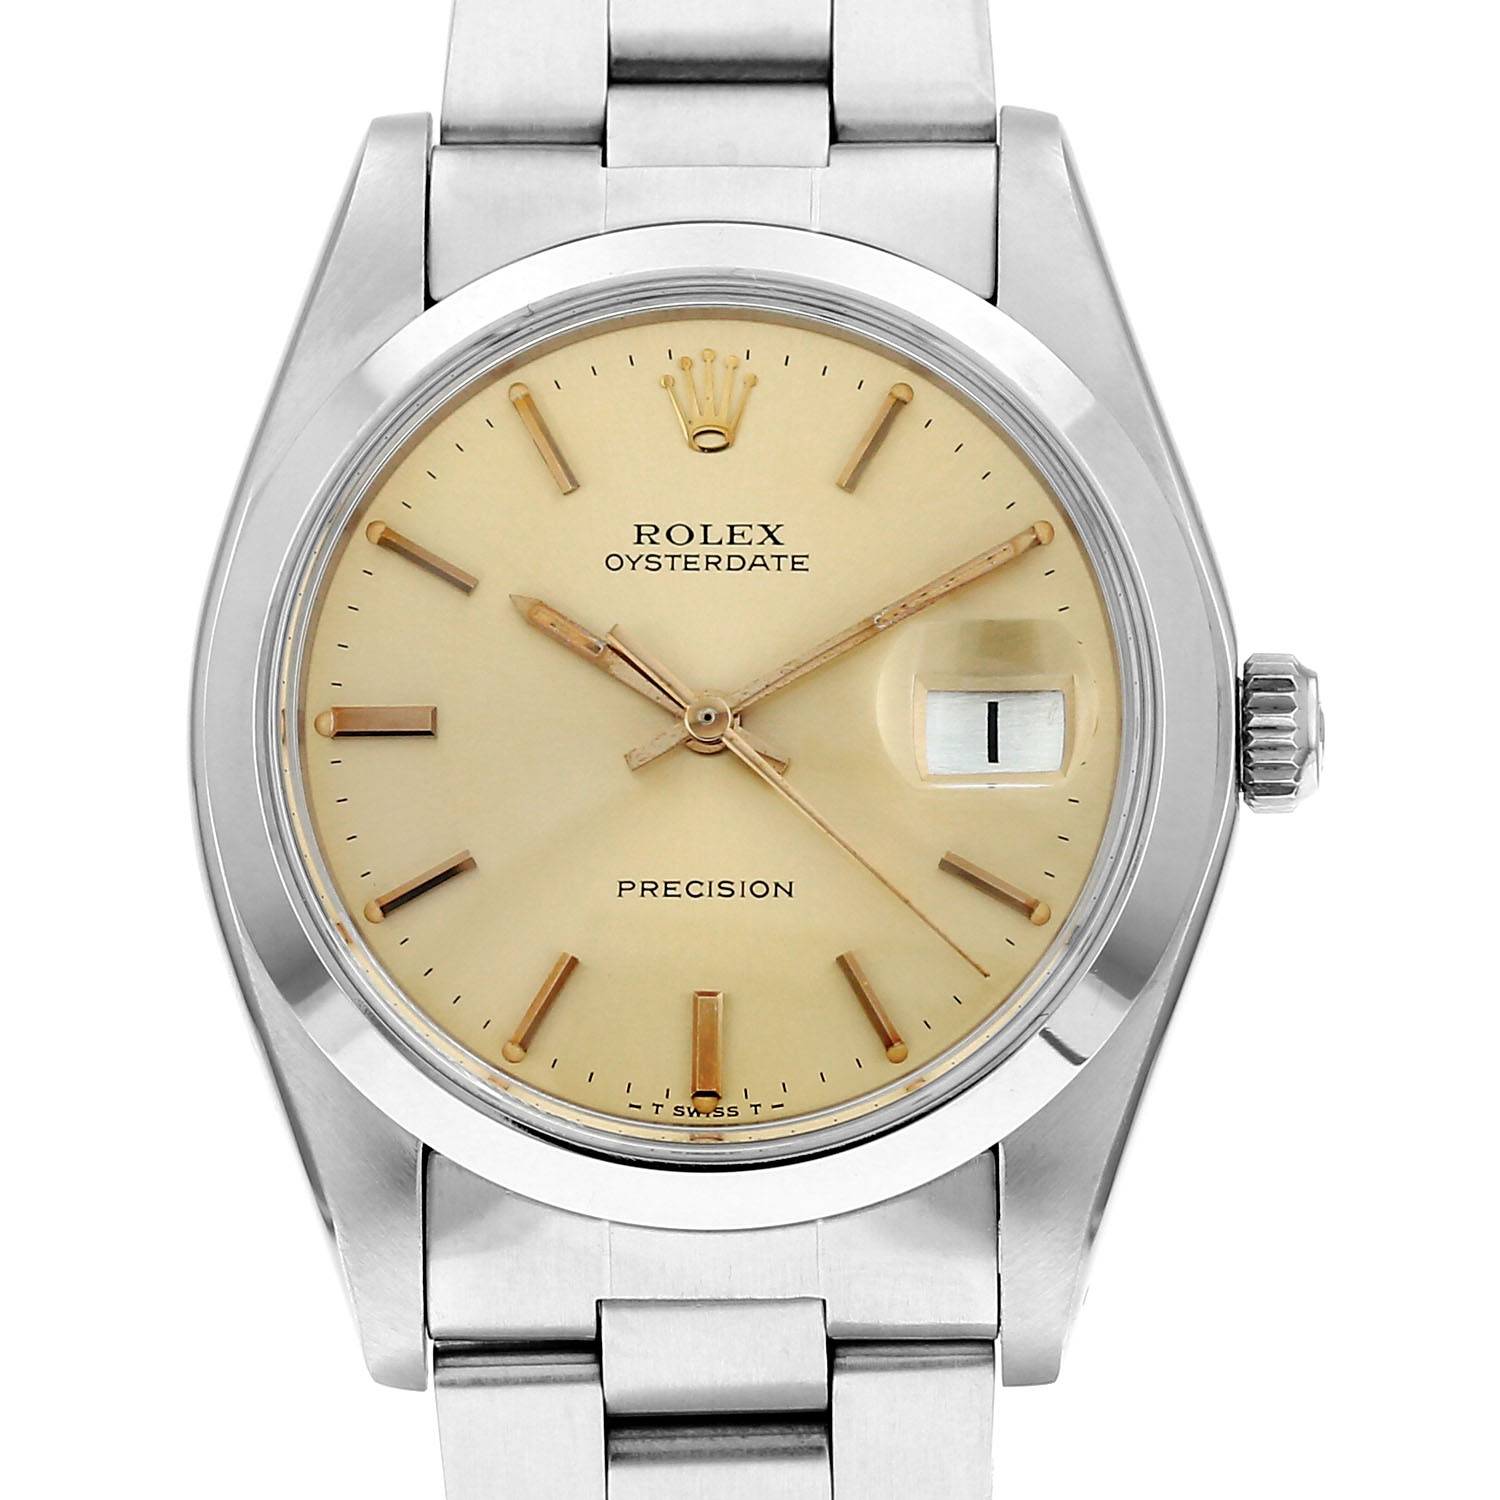 Rolex Oyster Date Precision Watch 408361 | Collector Square